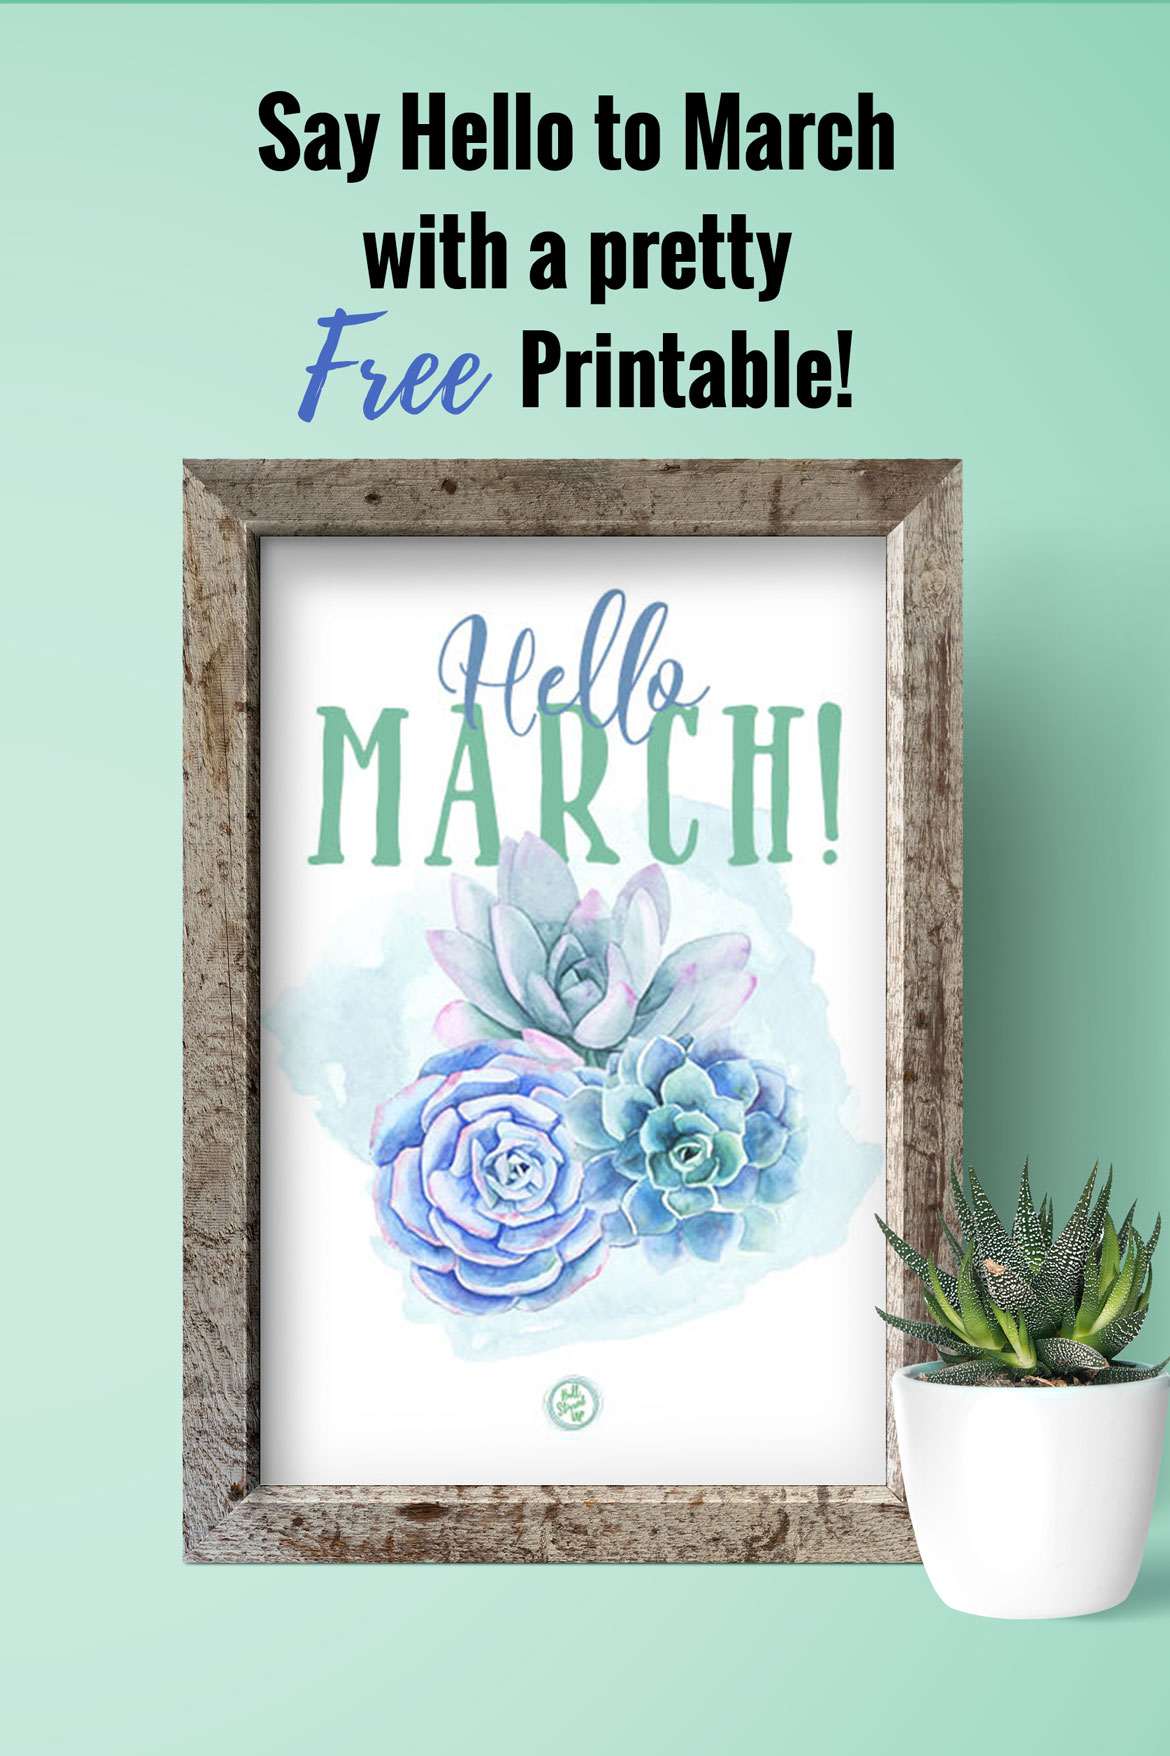 It's March and time for a pretty new printable